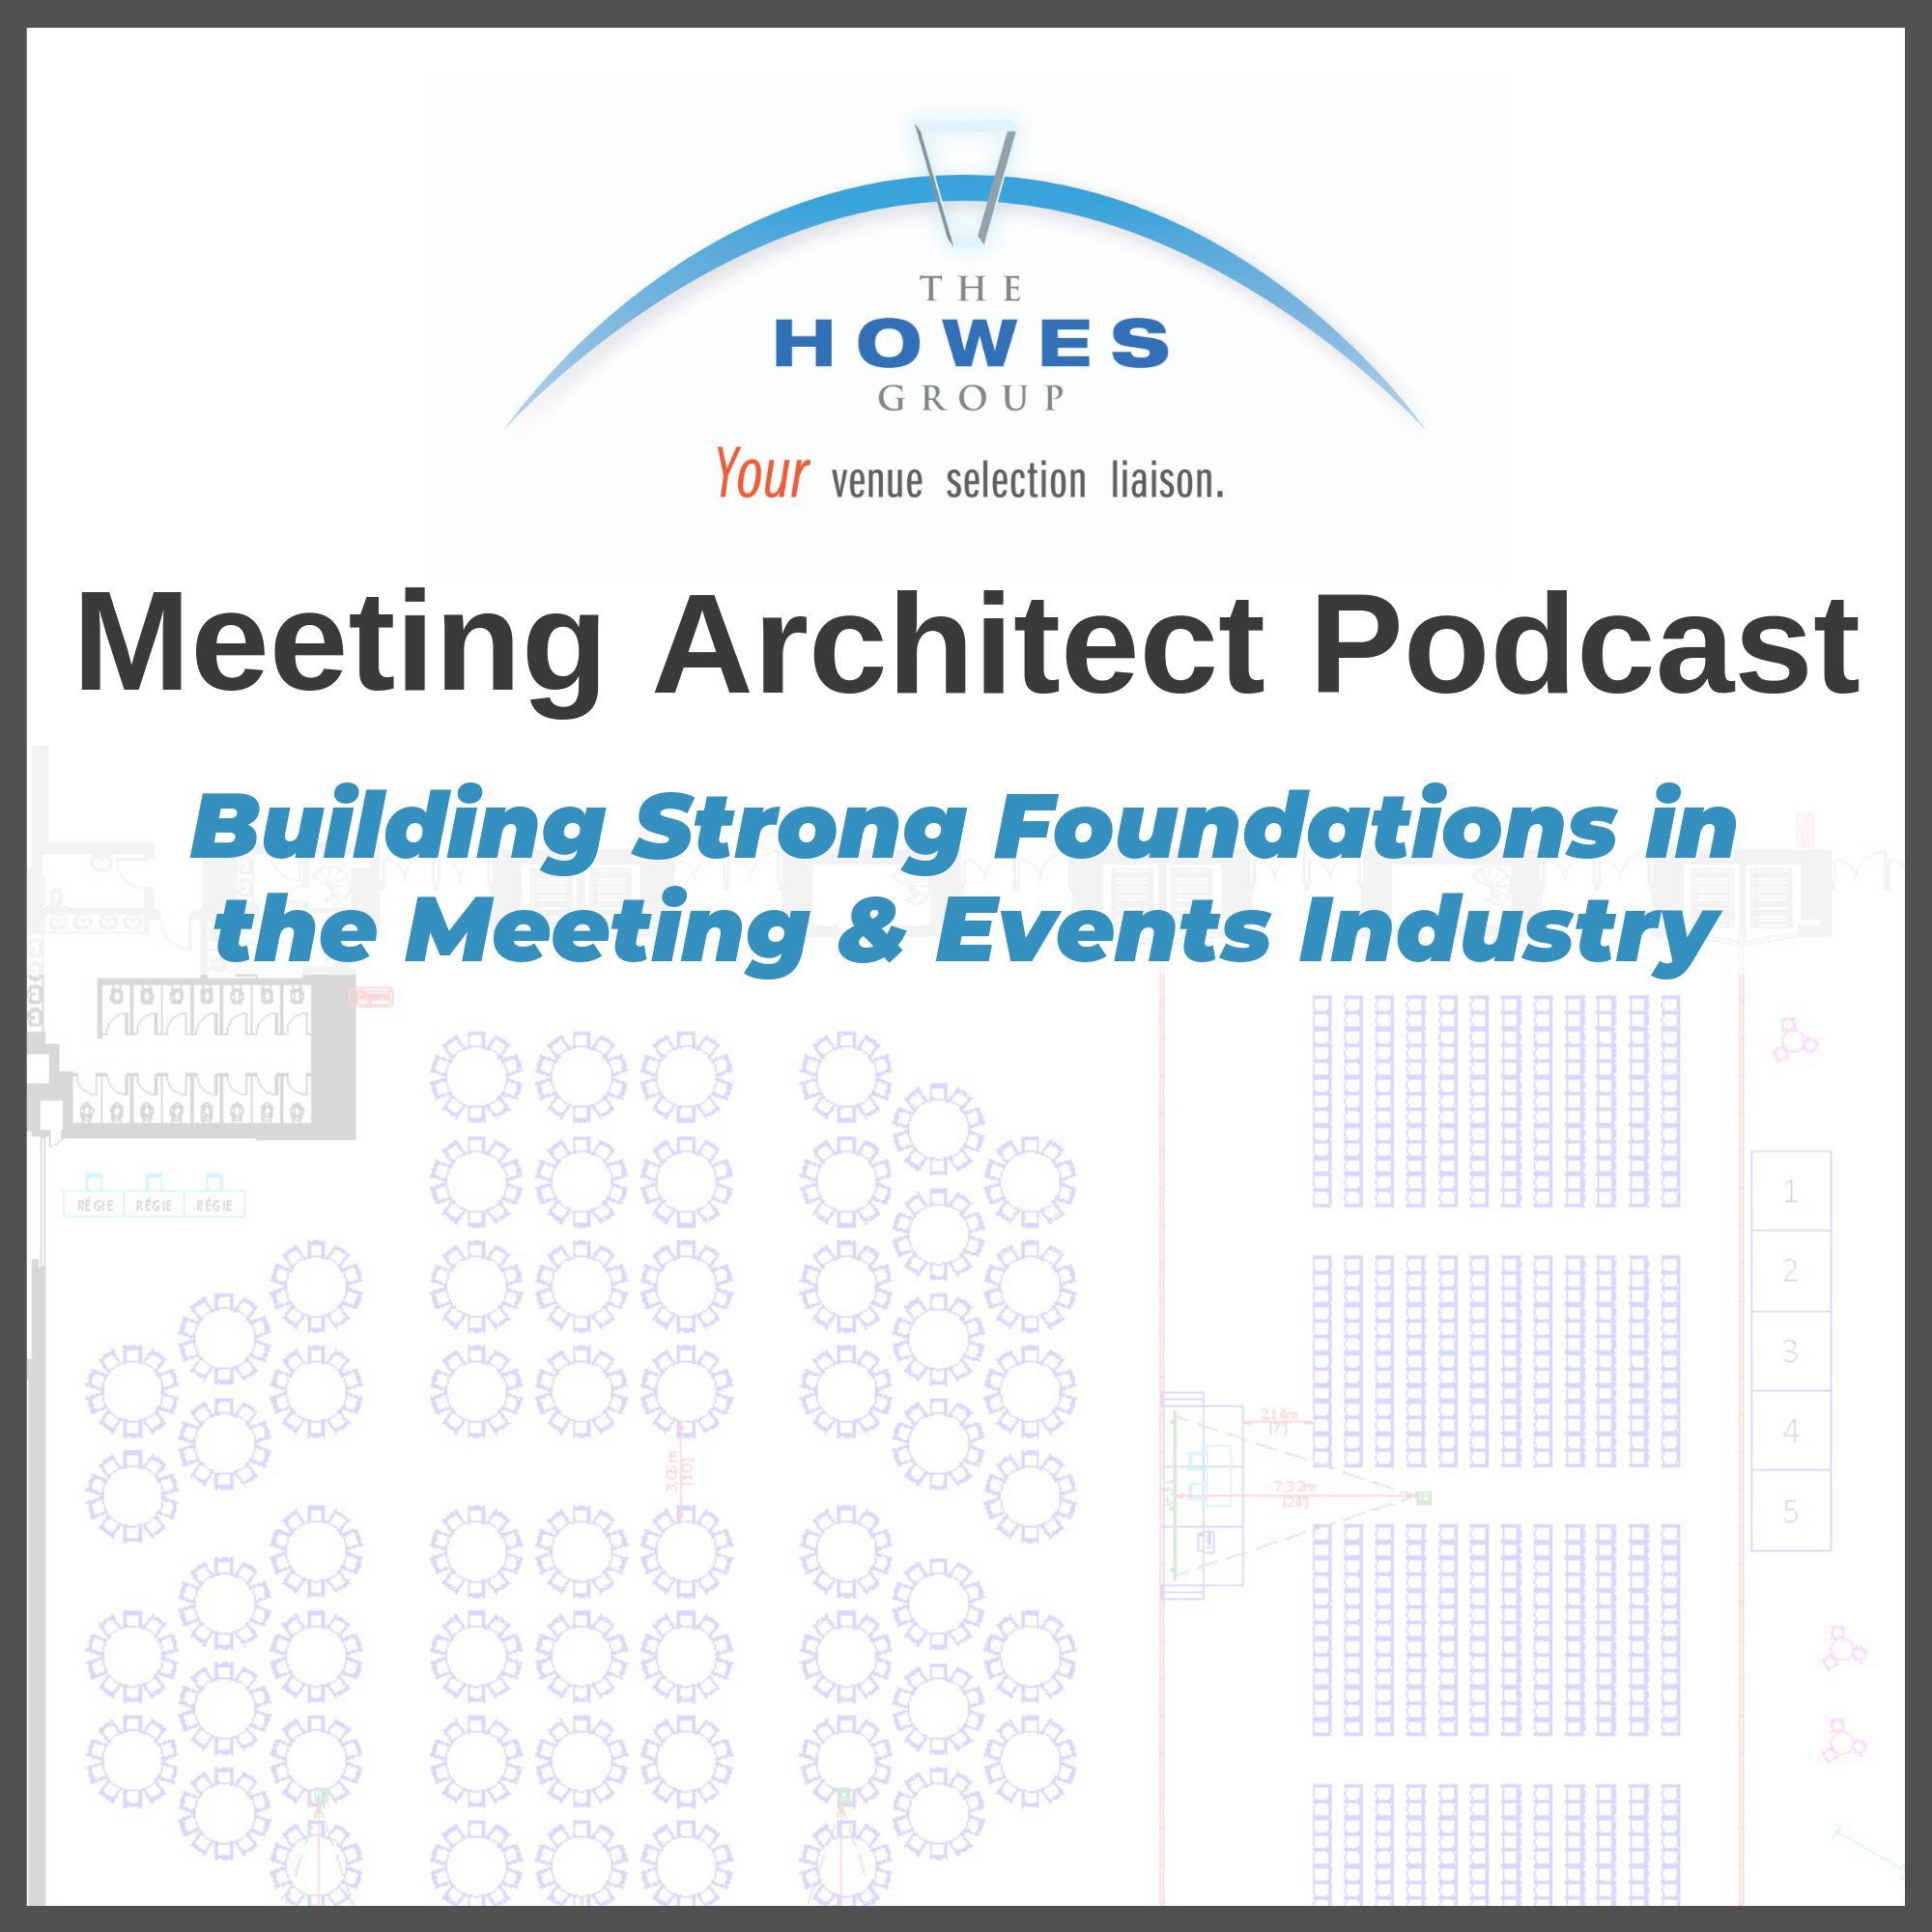 Meeting Architect Podcast